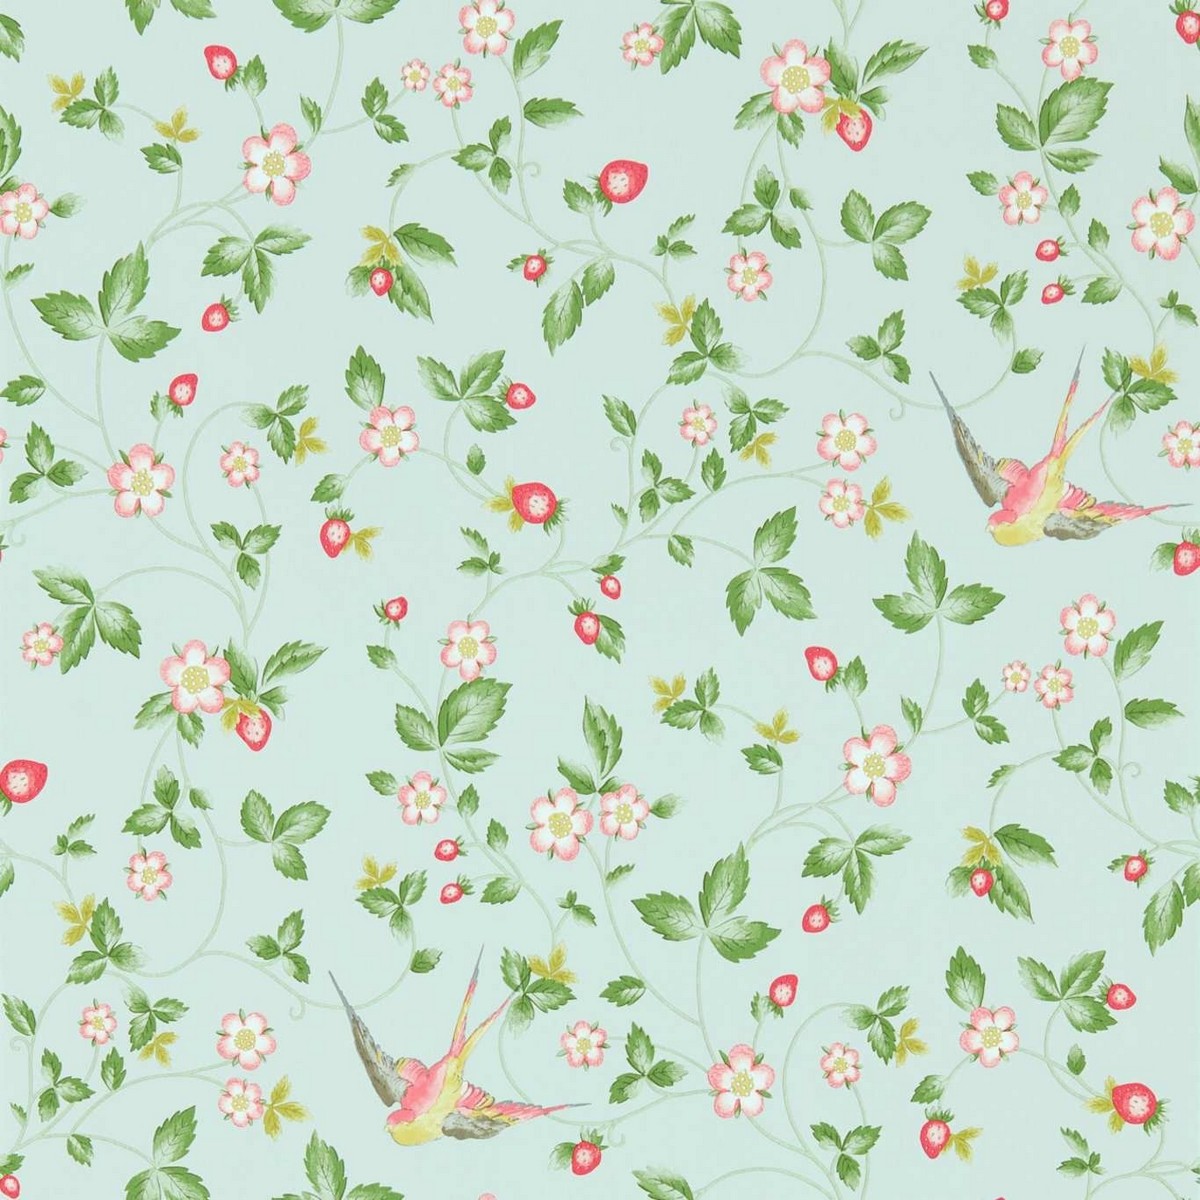 Wild Strawberry Dove Fabric by Wedgwood